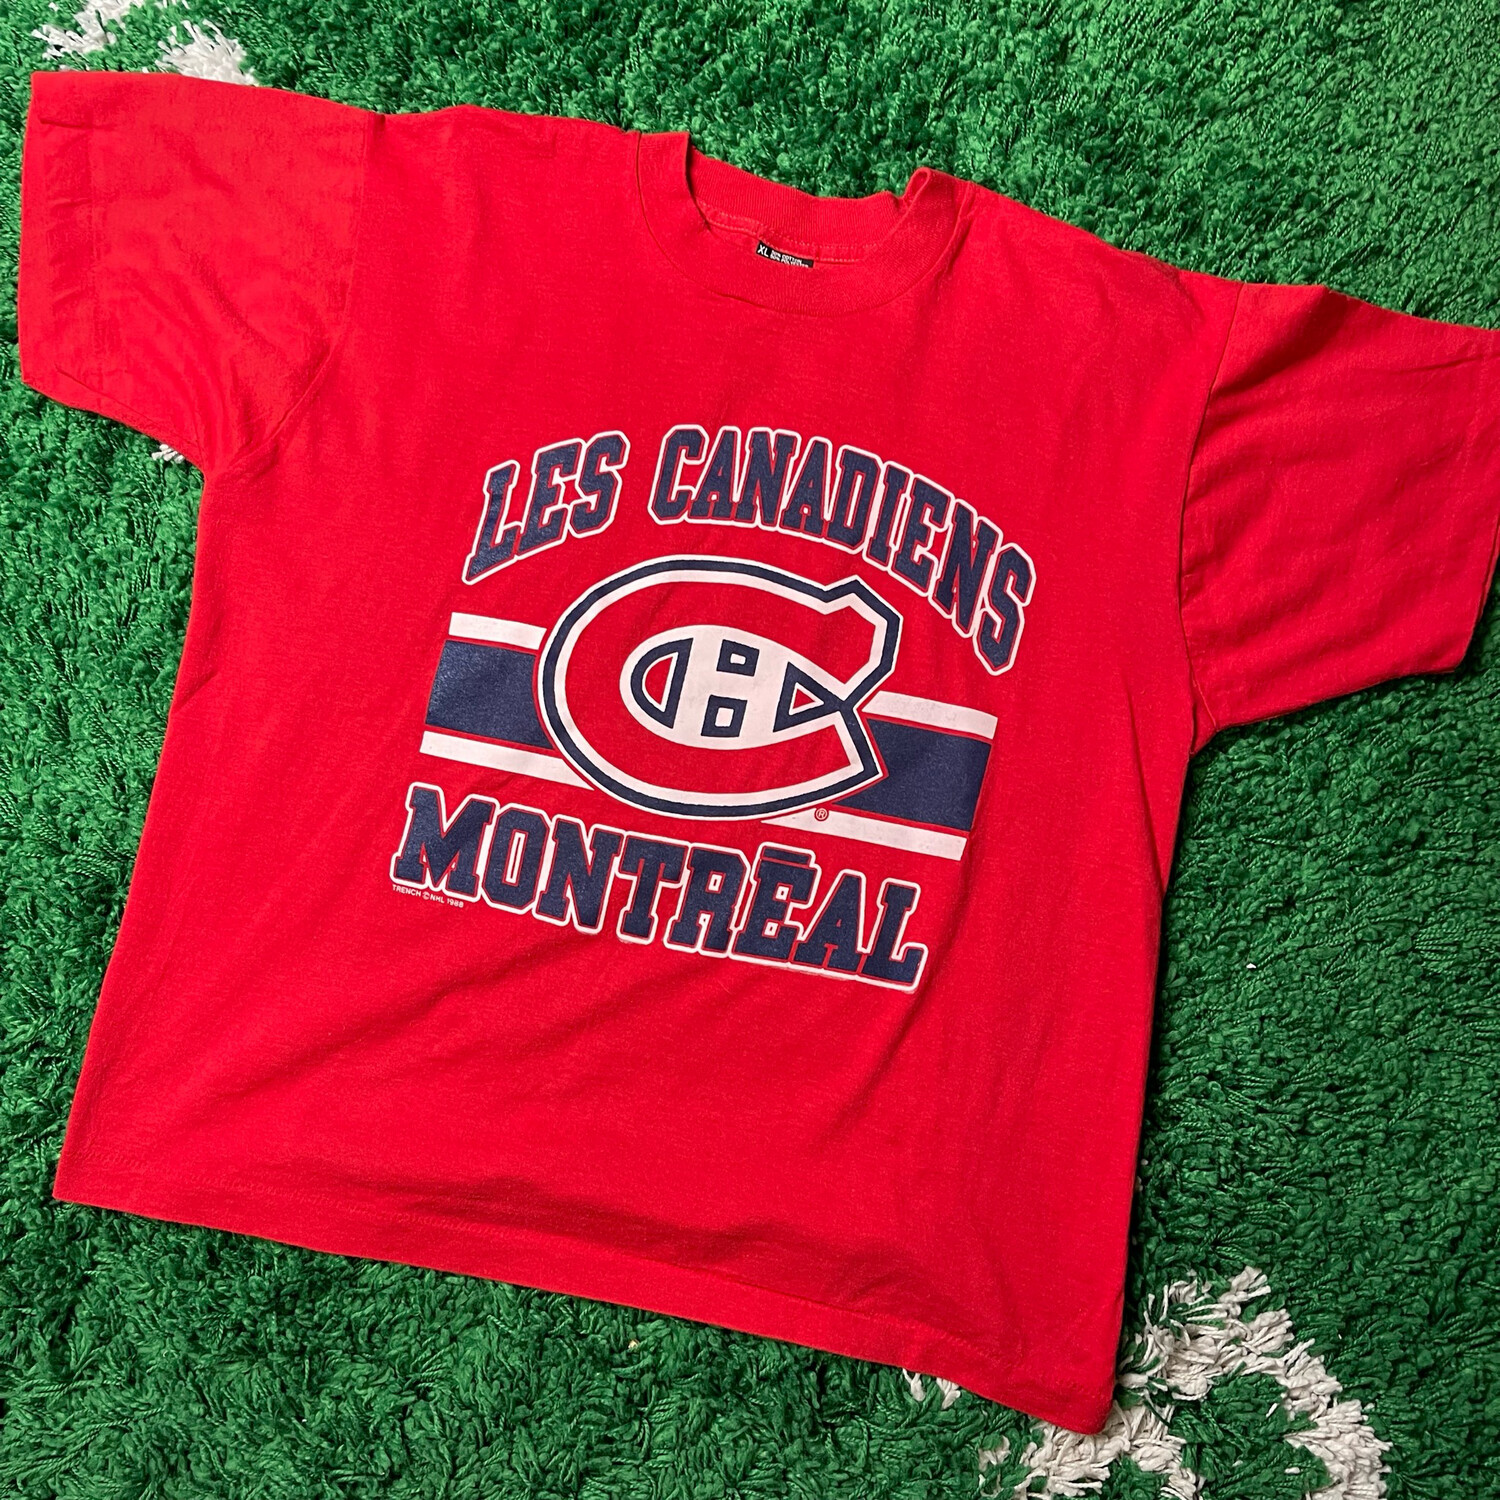 Les Canadiens Montreal 1988 Tee Size XL